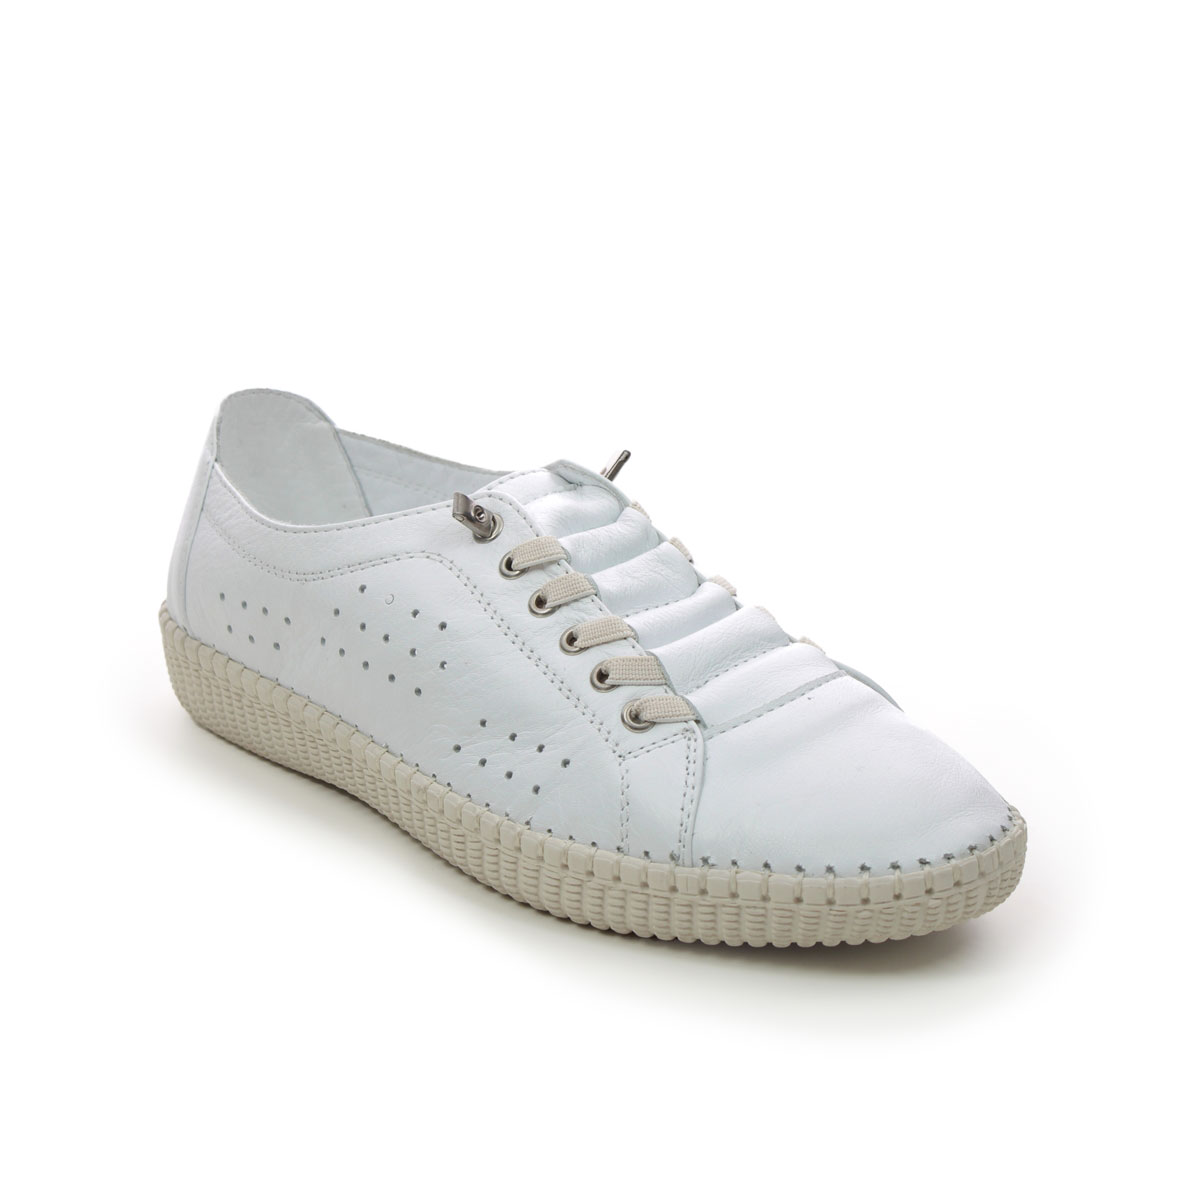 Lotus Kamari Sarah WHITE LEATHER Womens Comfort Slip On Shoes in a Plain Leather in Size 6